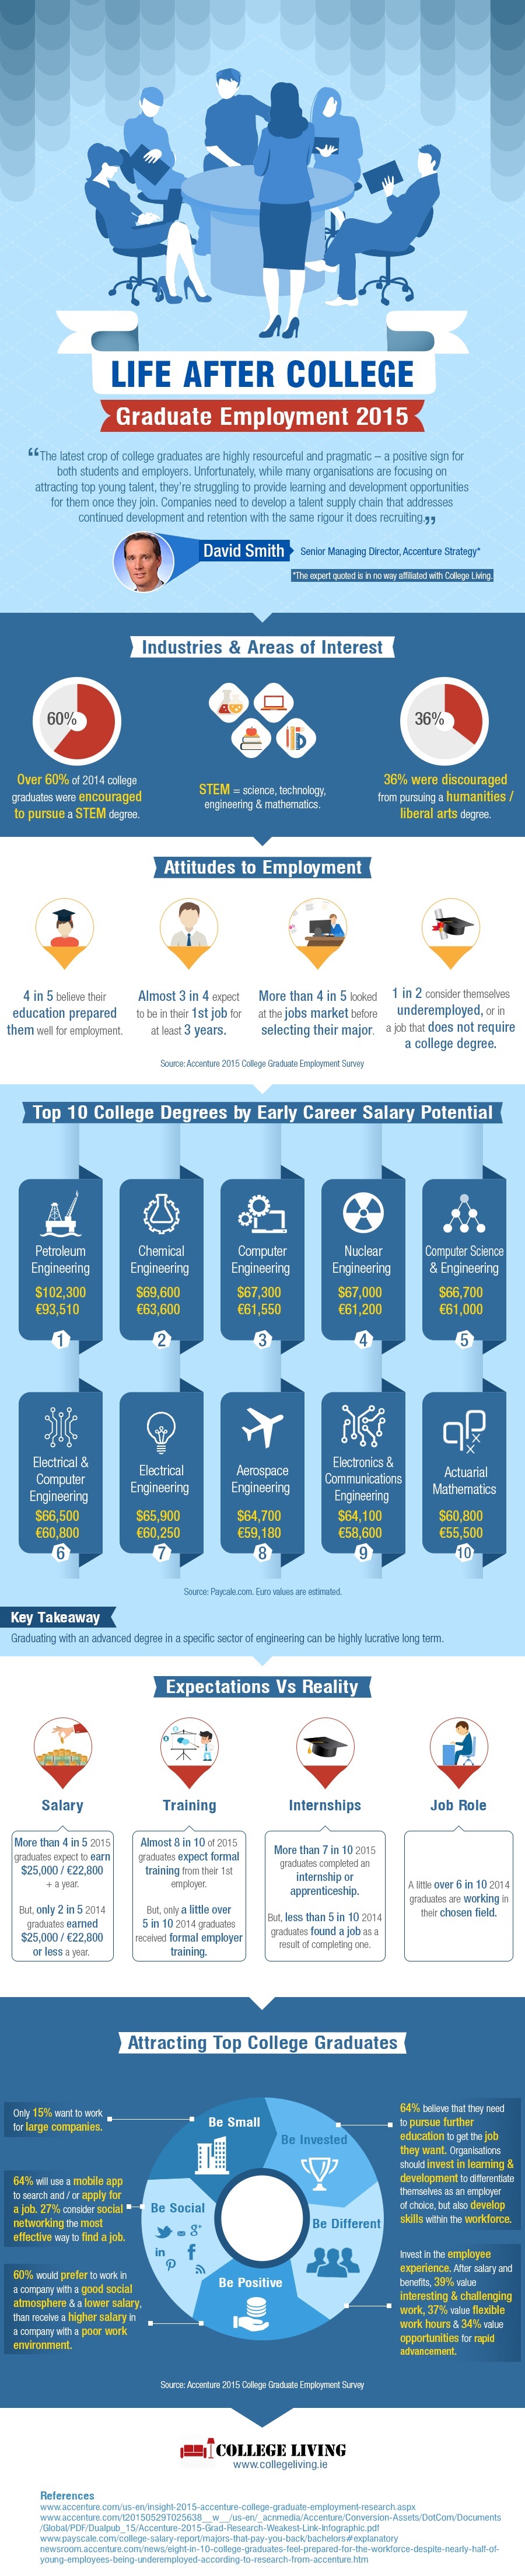 Life After College: Graduate Employment 2015